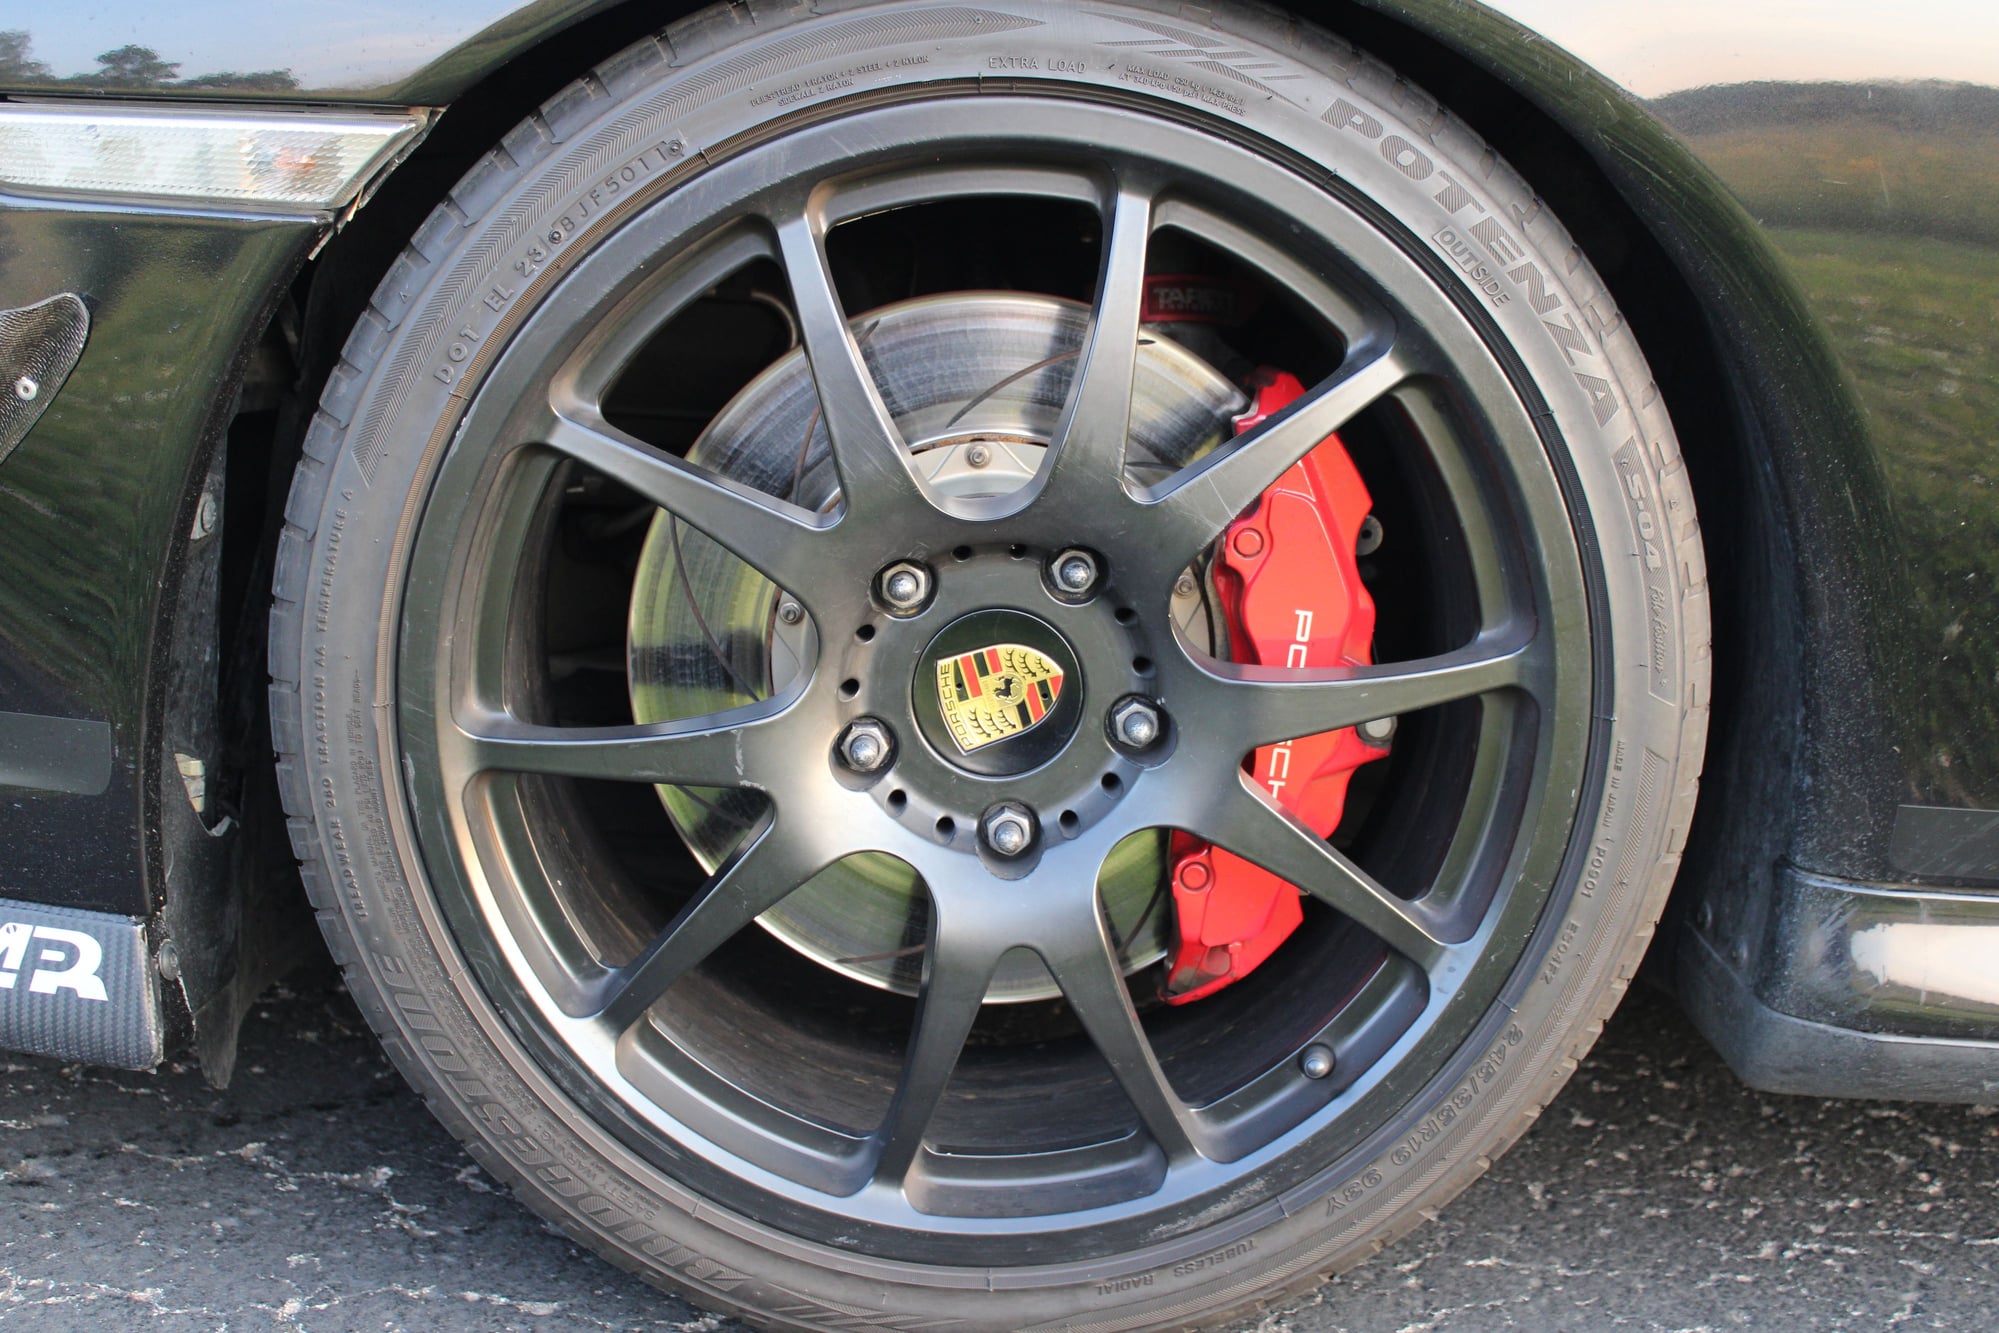 Wheels and Tires/Axles - DFW - Champion Motorsport RS171 Forged Monolite Wheels, mounted with used Potenza S04 - Used - Dallas, TX 75229, United States